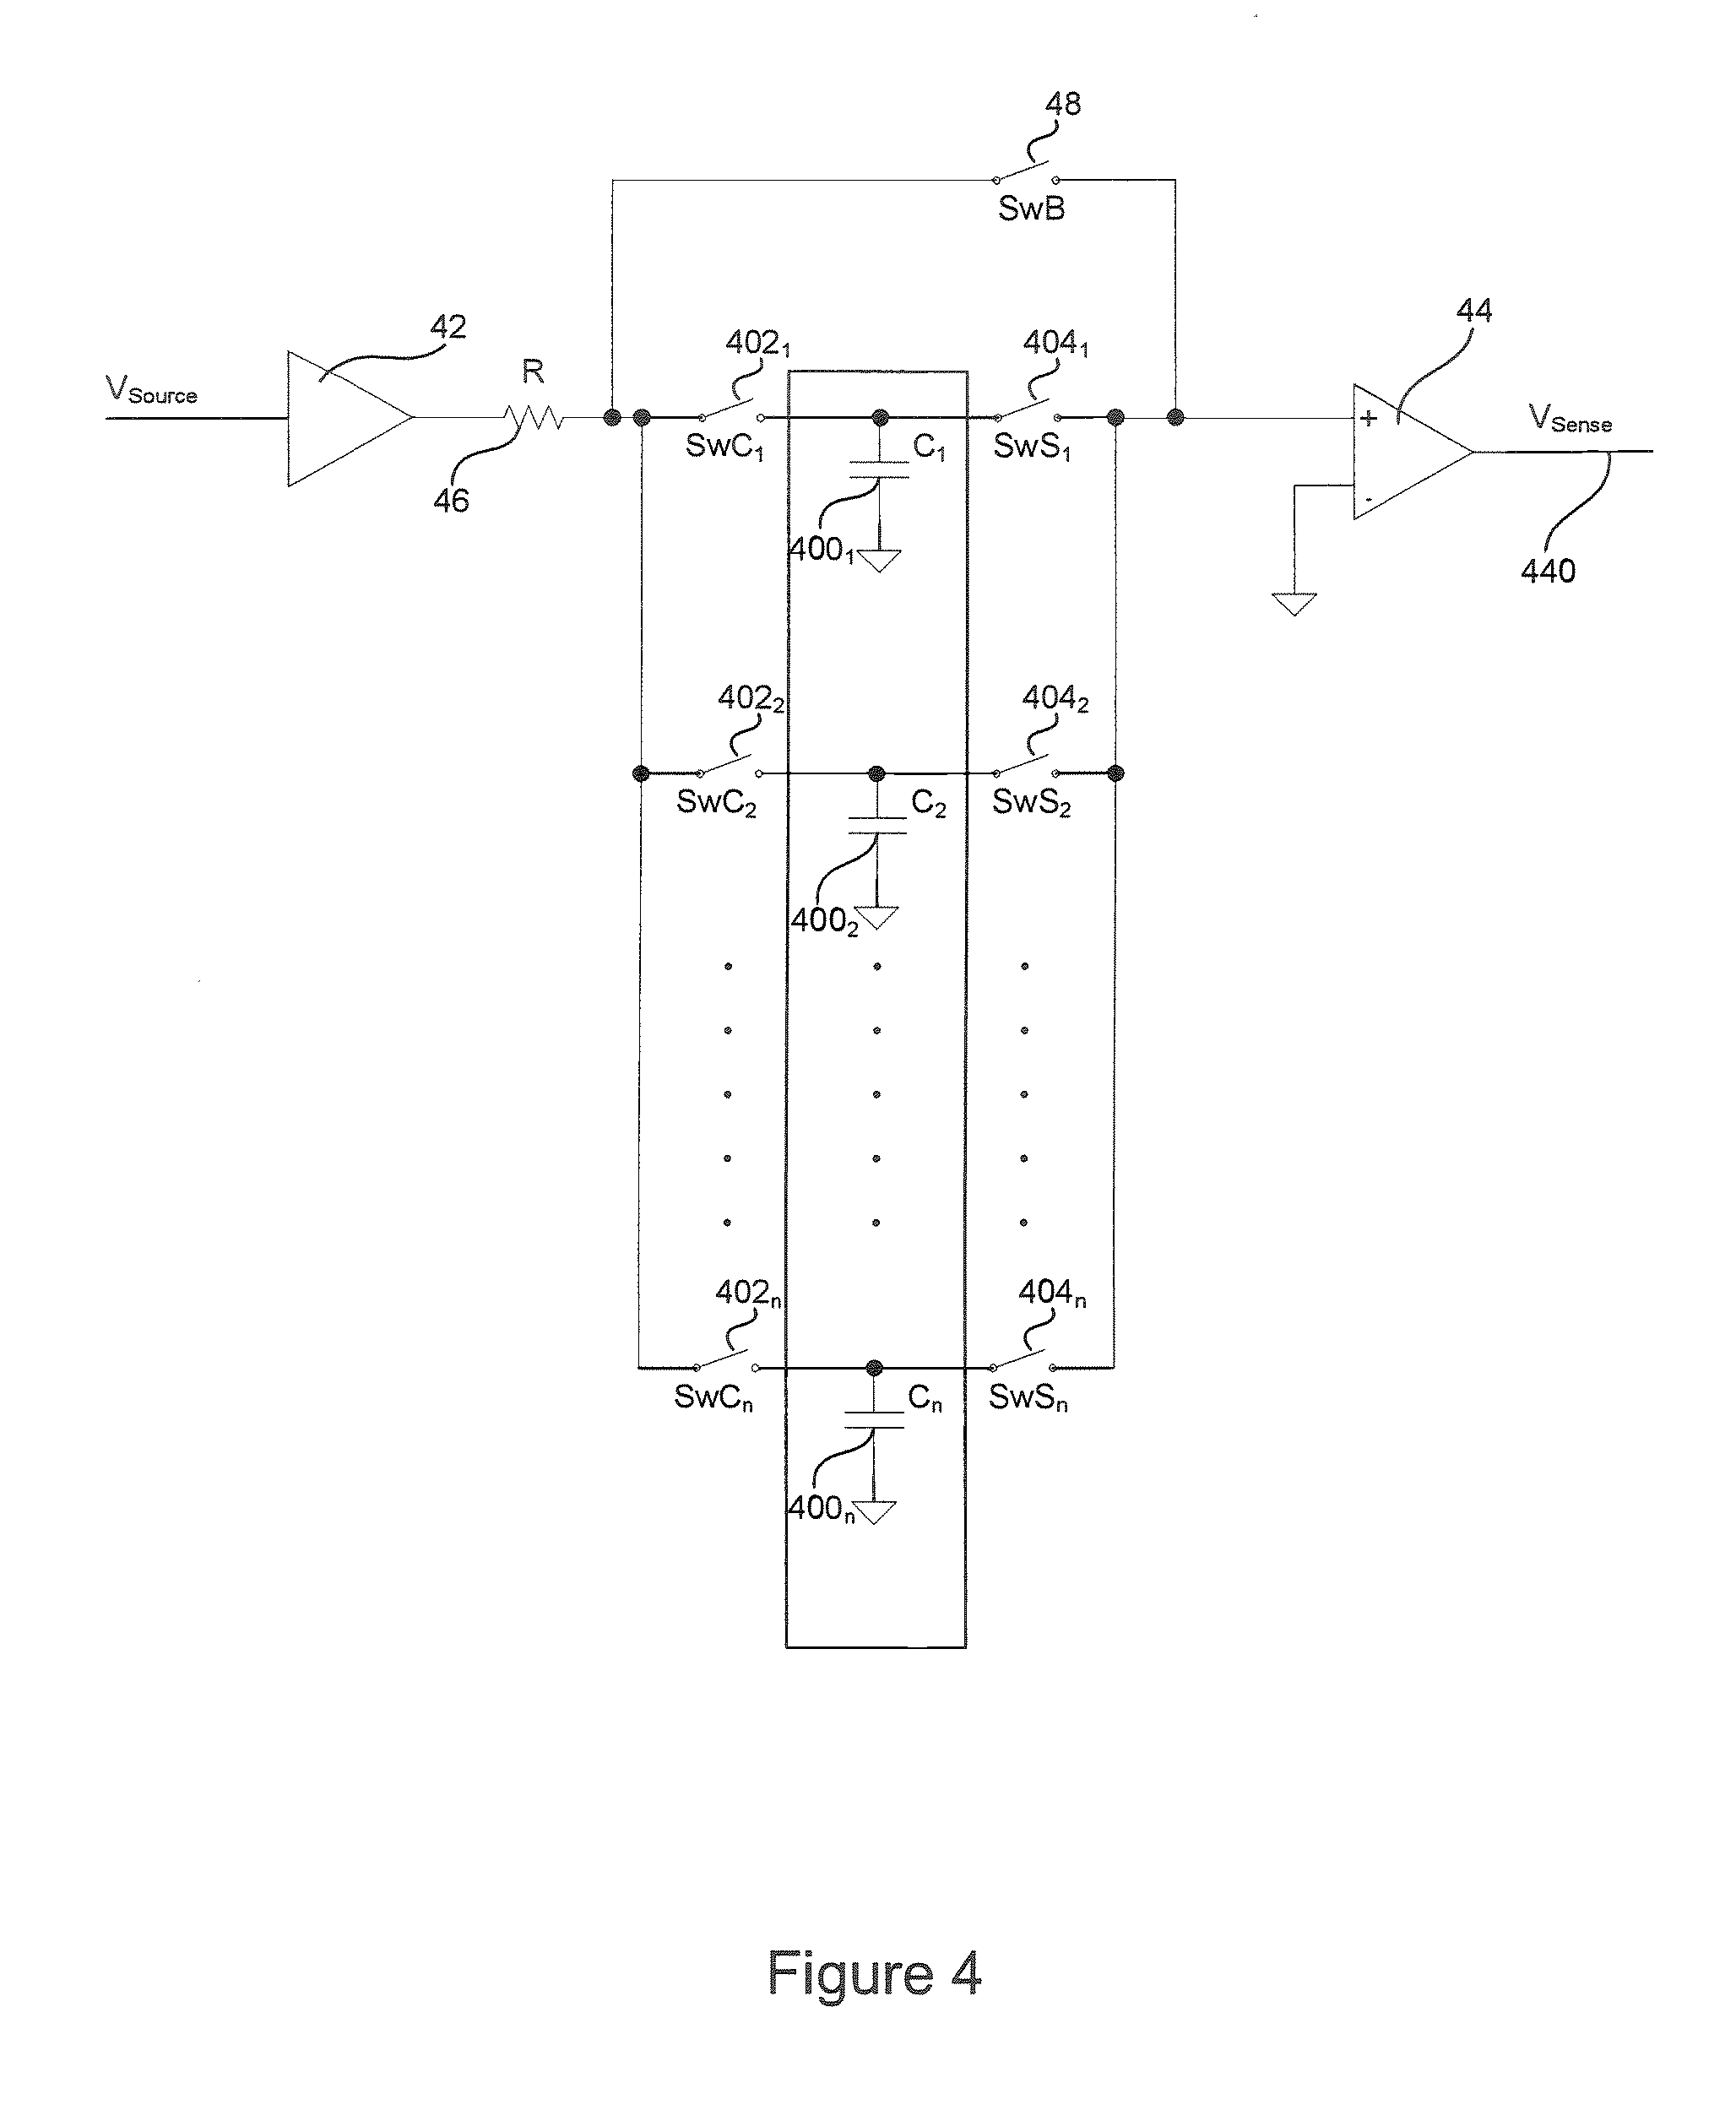 High-speed capacitor leakage measurement systems and methods